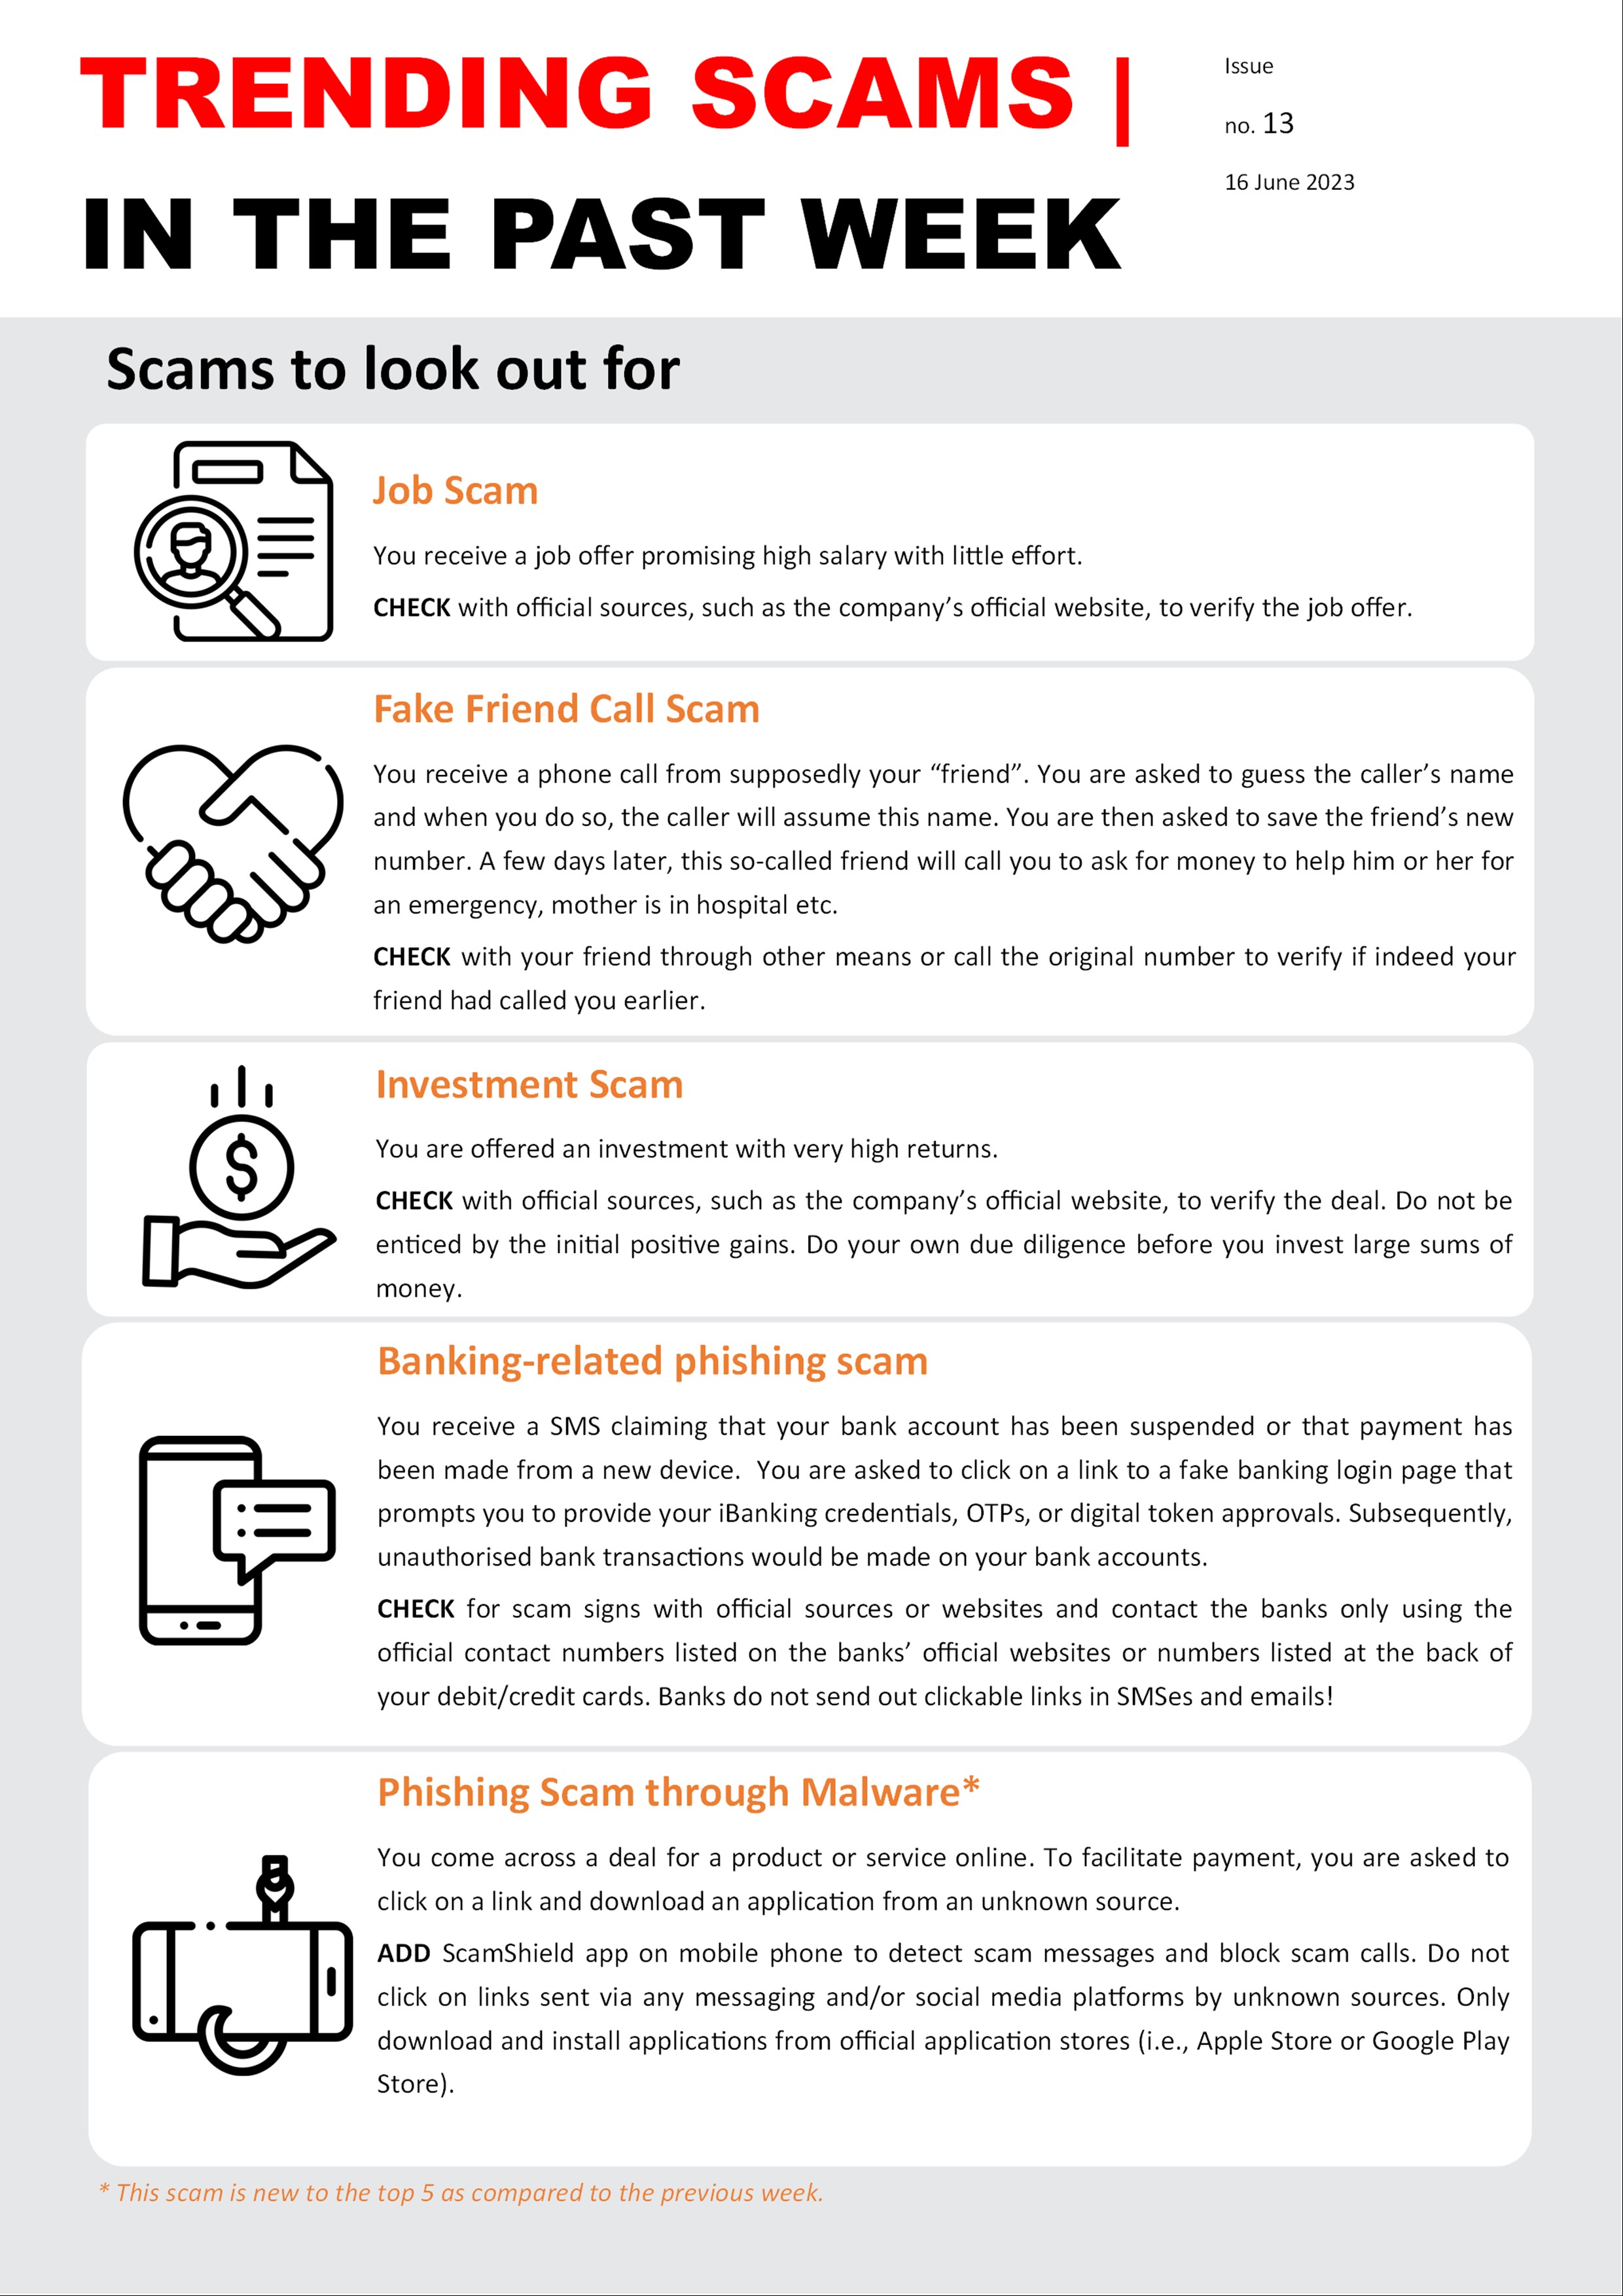 Weekly Bulletin Issue 13 - Scams to look out for